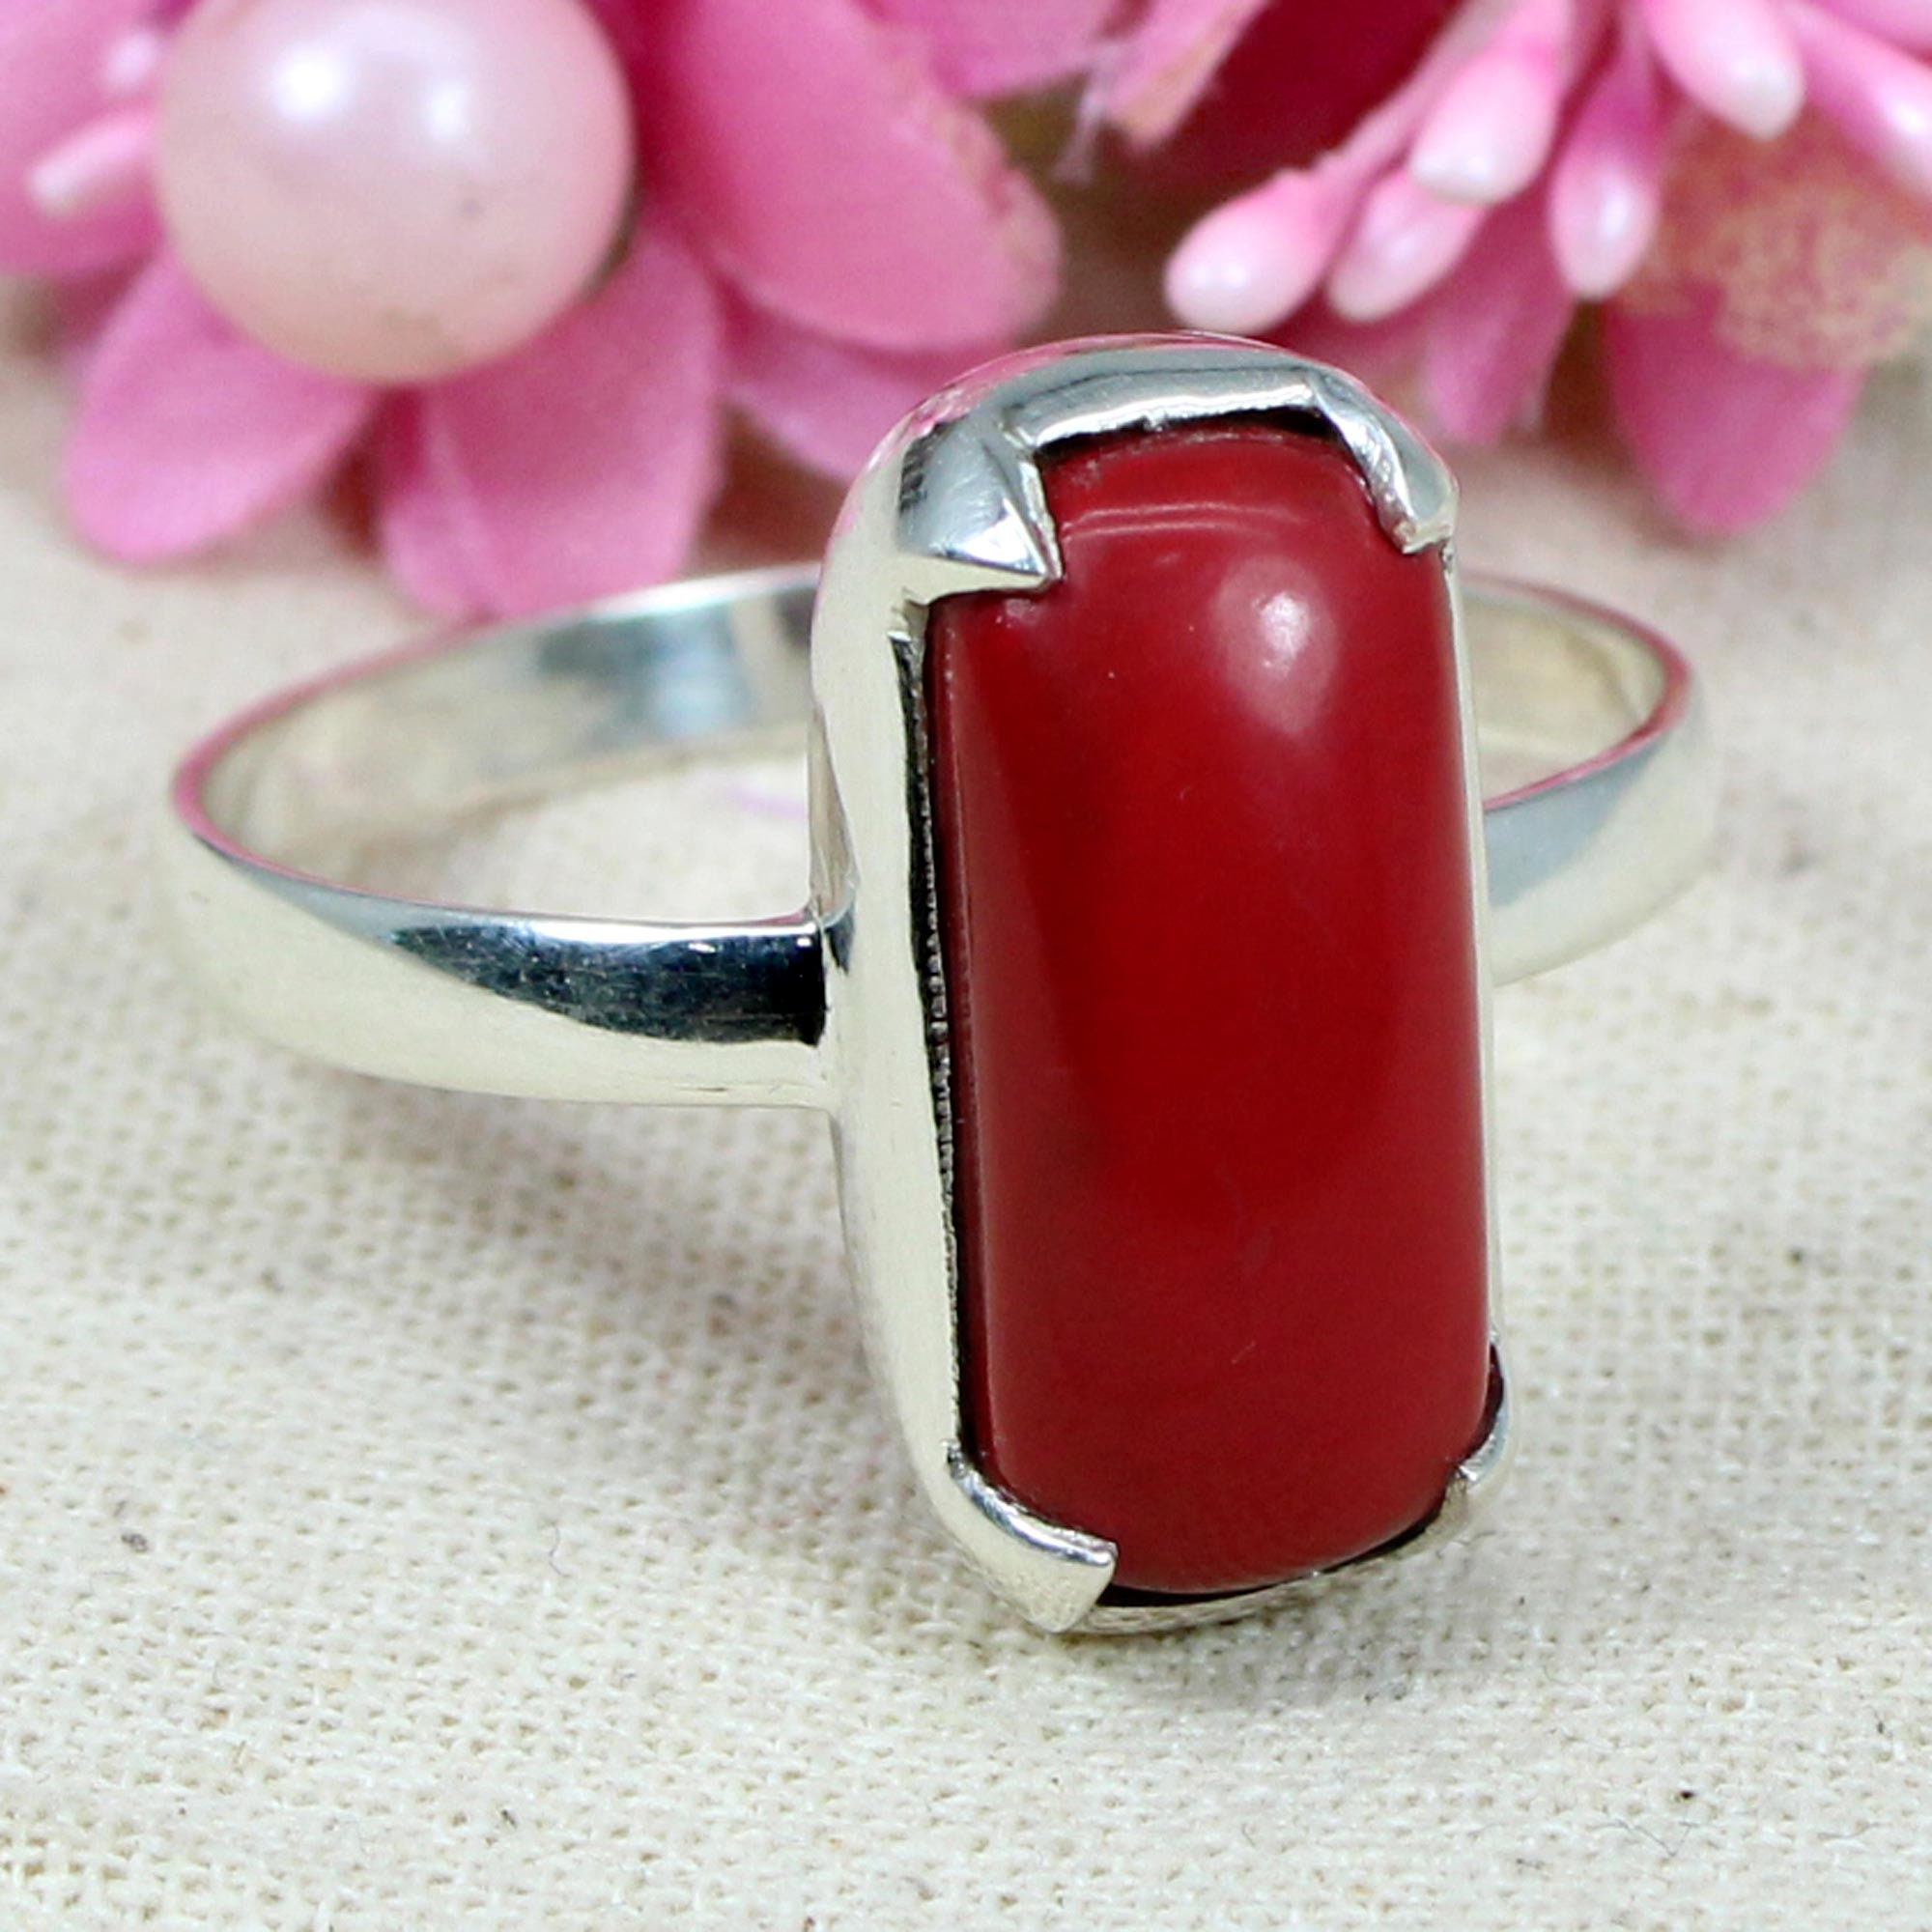 18k Gold Vintage, Sardinian, Ox Blood Red Coral and .31 ct VVS Diamond Ring  18k size 5.5 Coupons Accepted for Limited Time